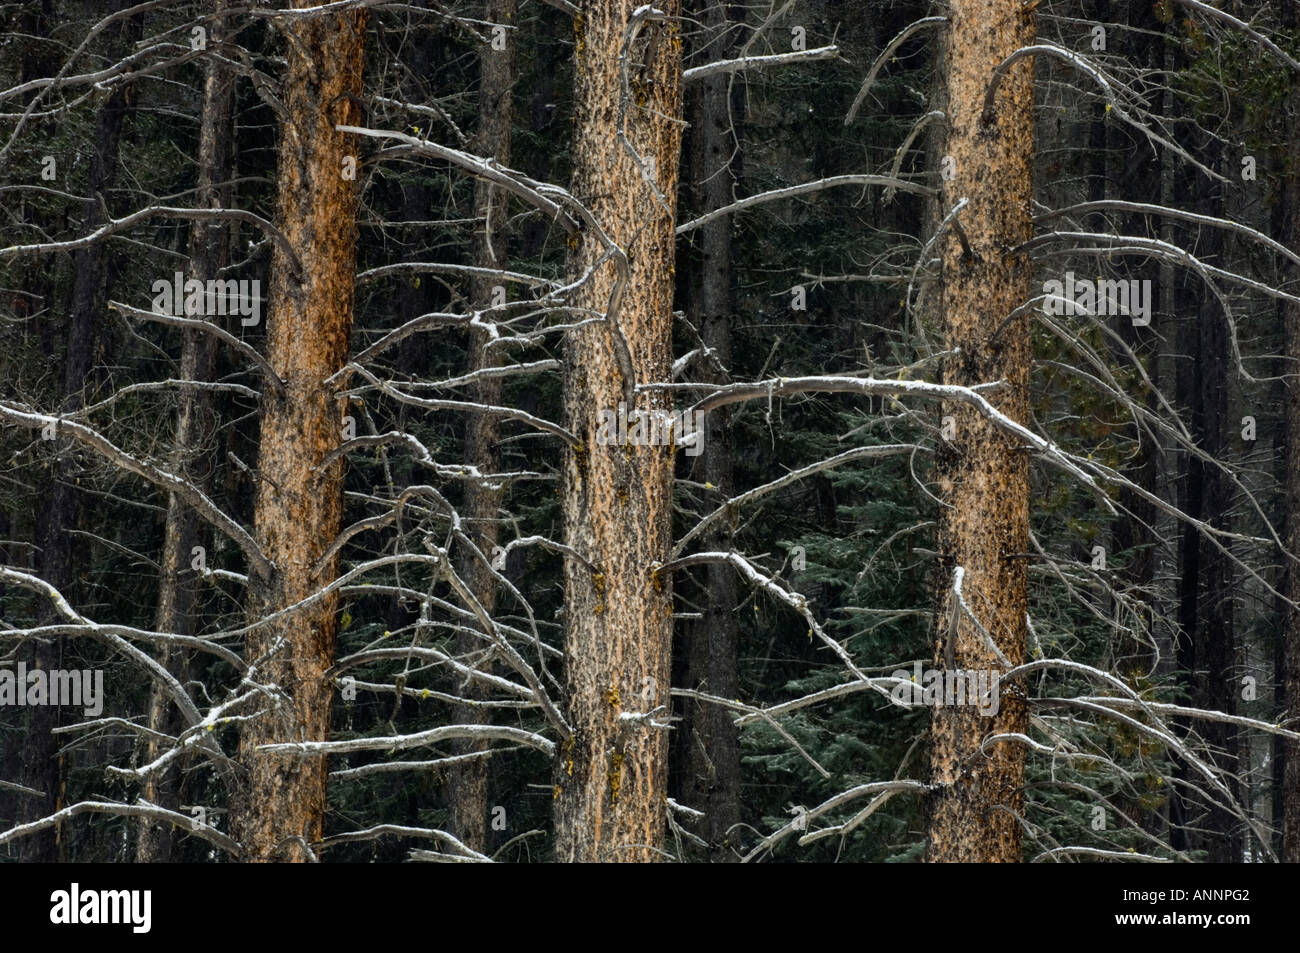 Lodgepole pine (Pinus contorta) trunks and lower branches Banff National Park, Alberta, Canada Stock Photo